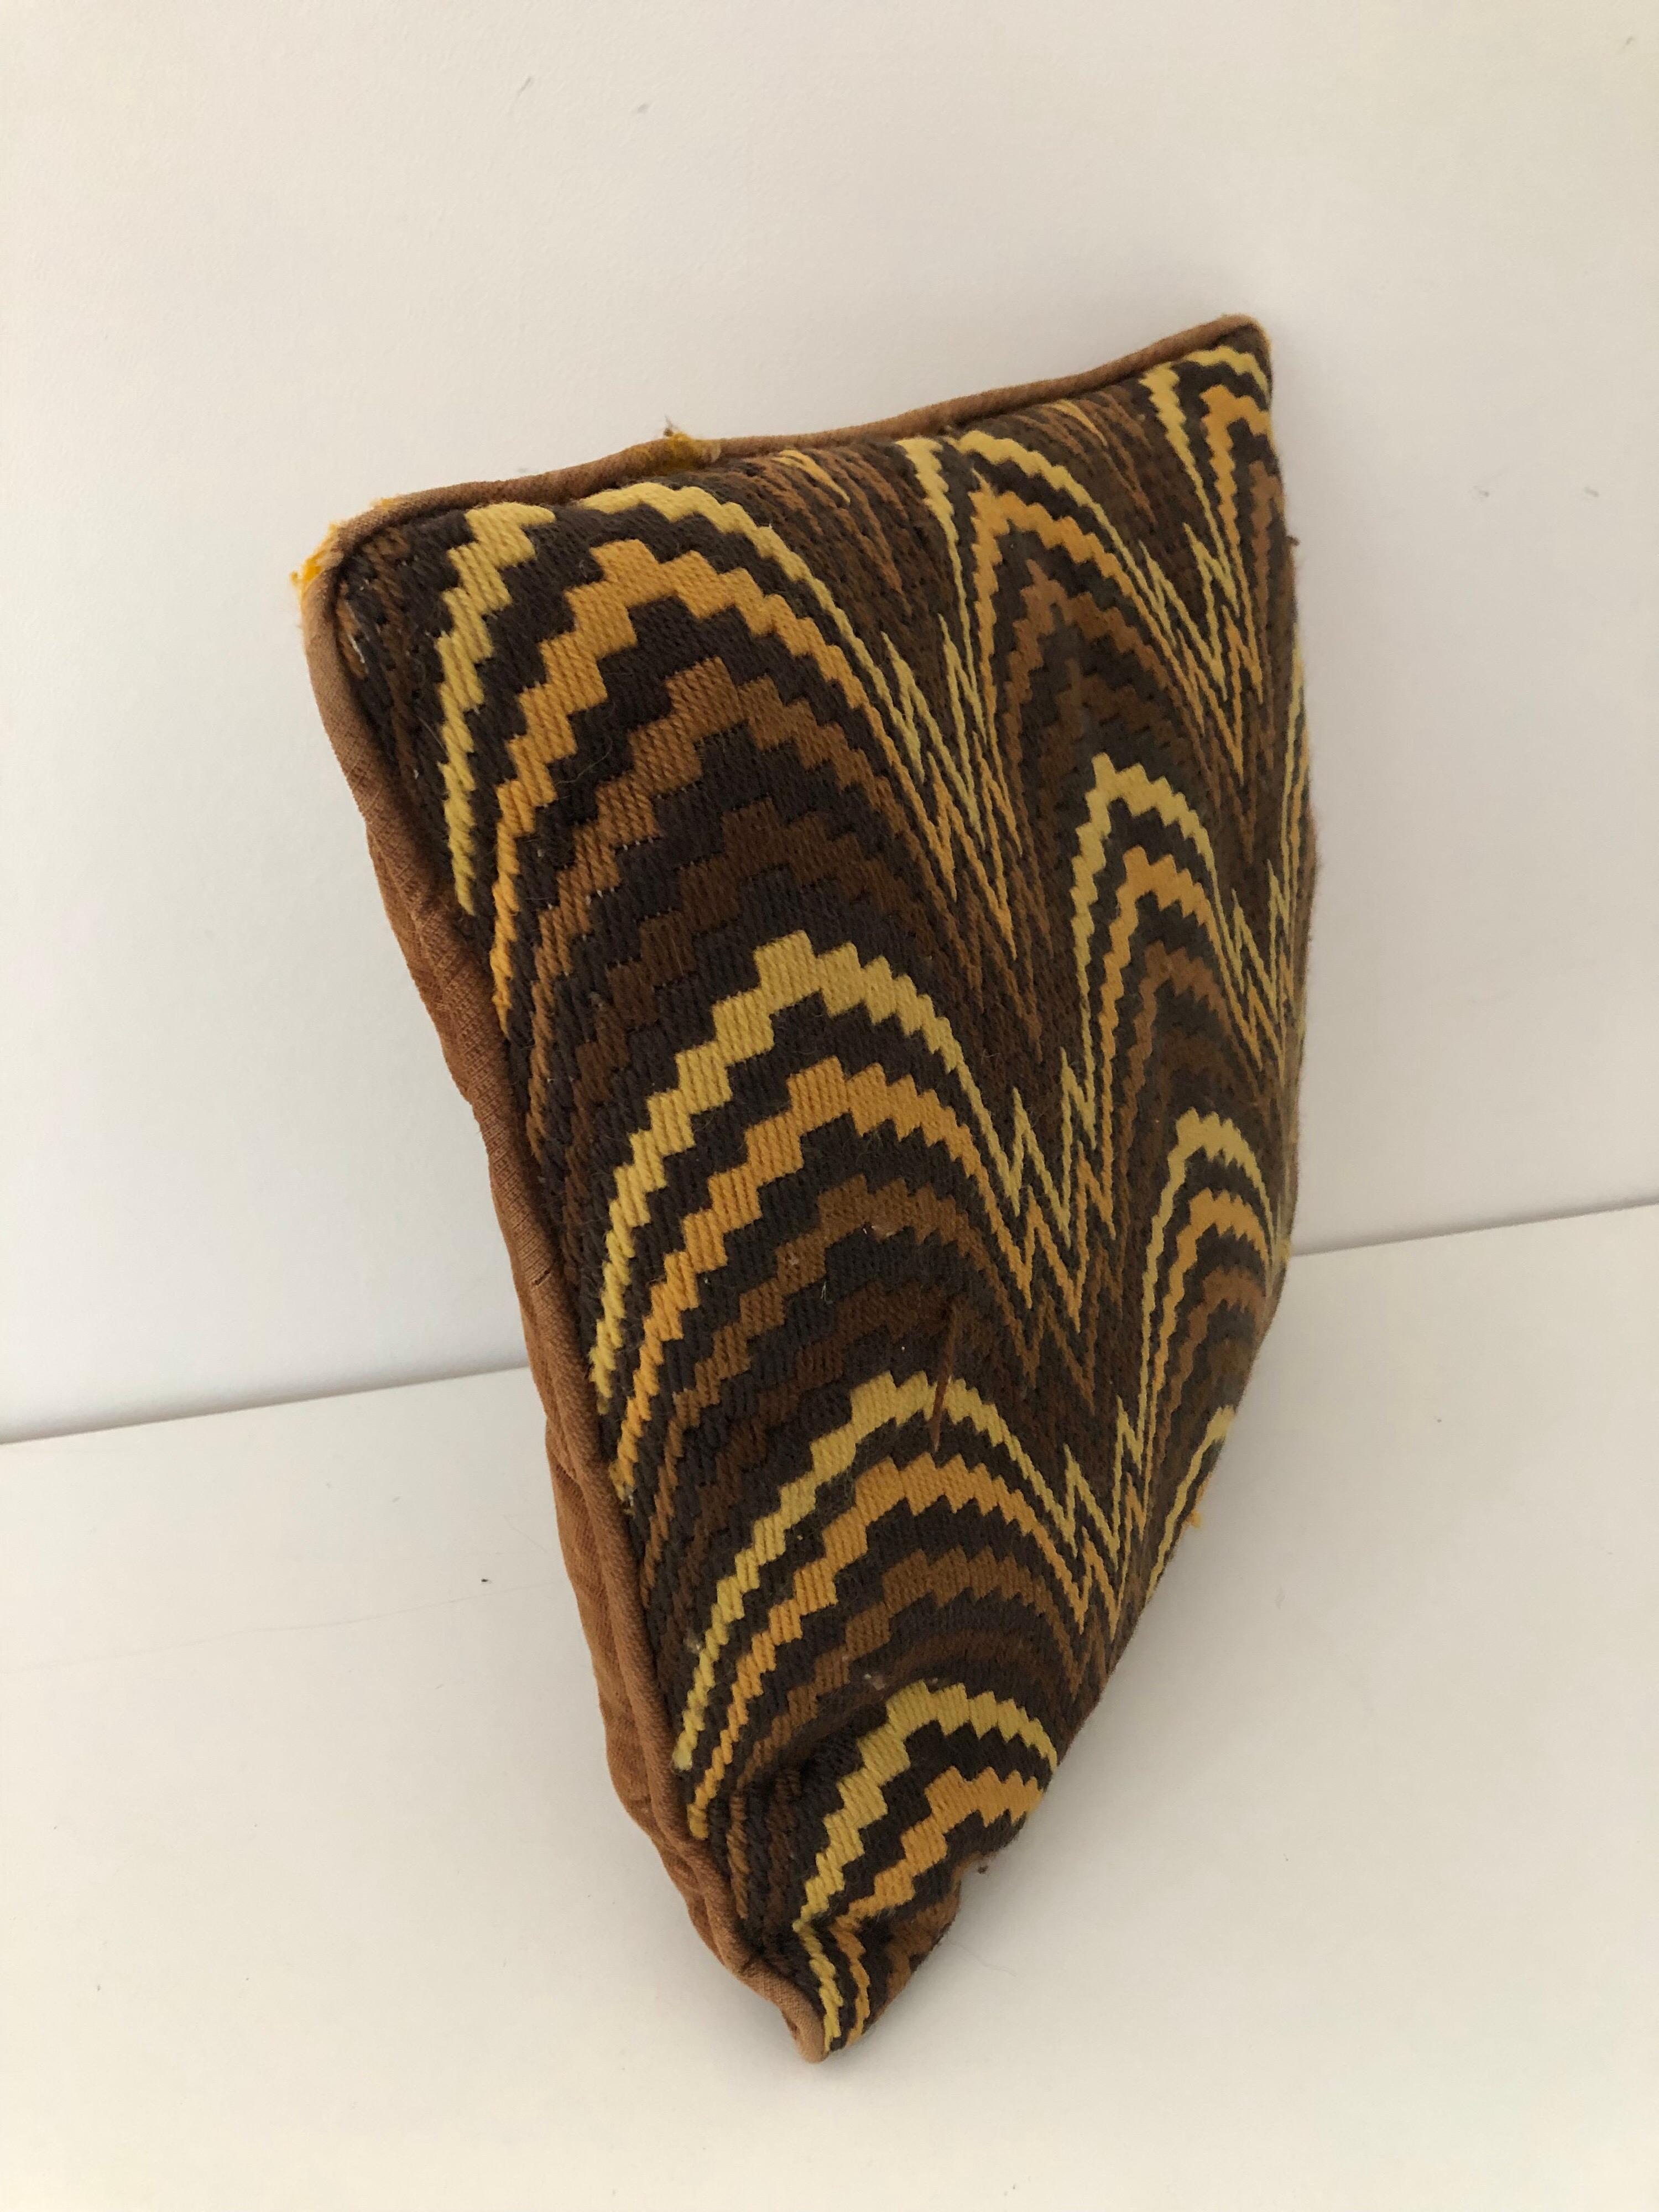 A handmade midcentury flame stitch knit pillow with brown velvet back. Tones of black, brown, mustard, and yellow. Two associated pillows also available.